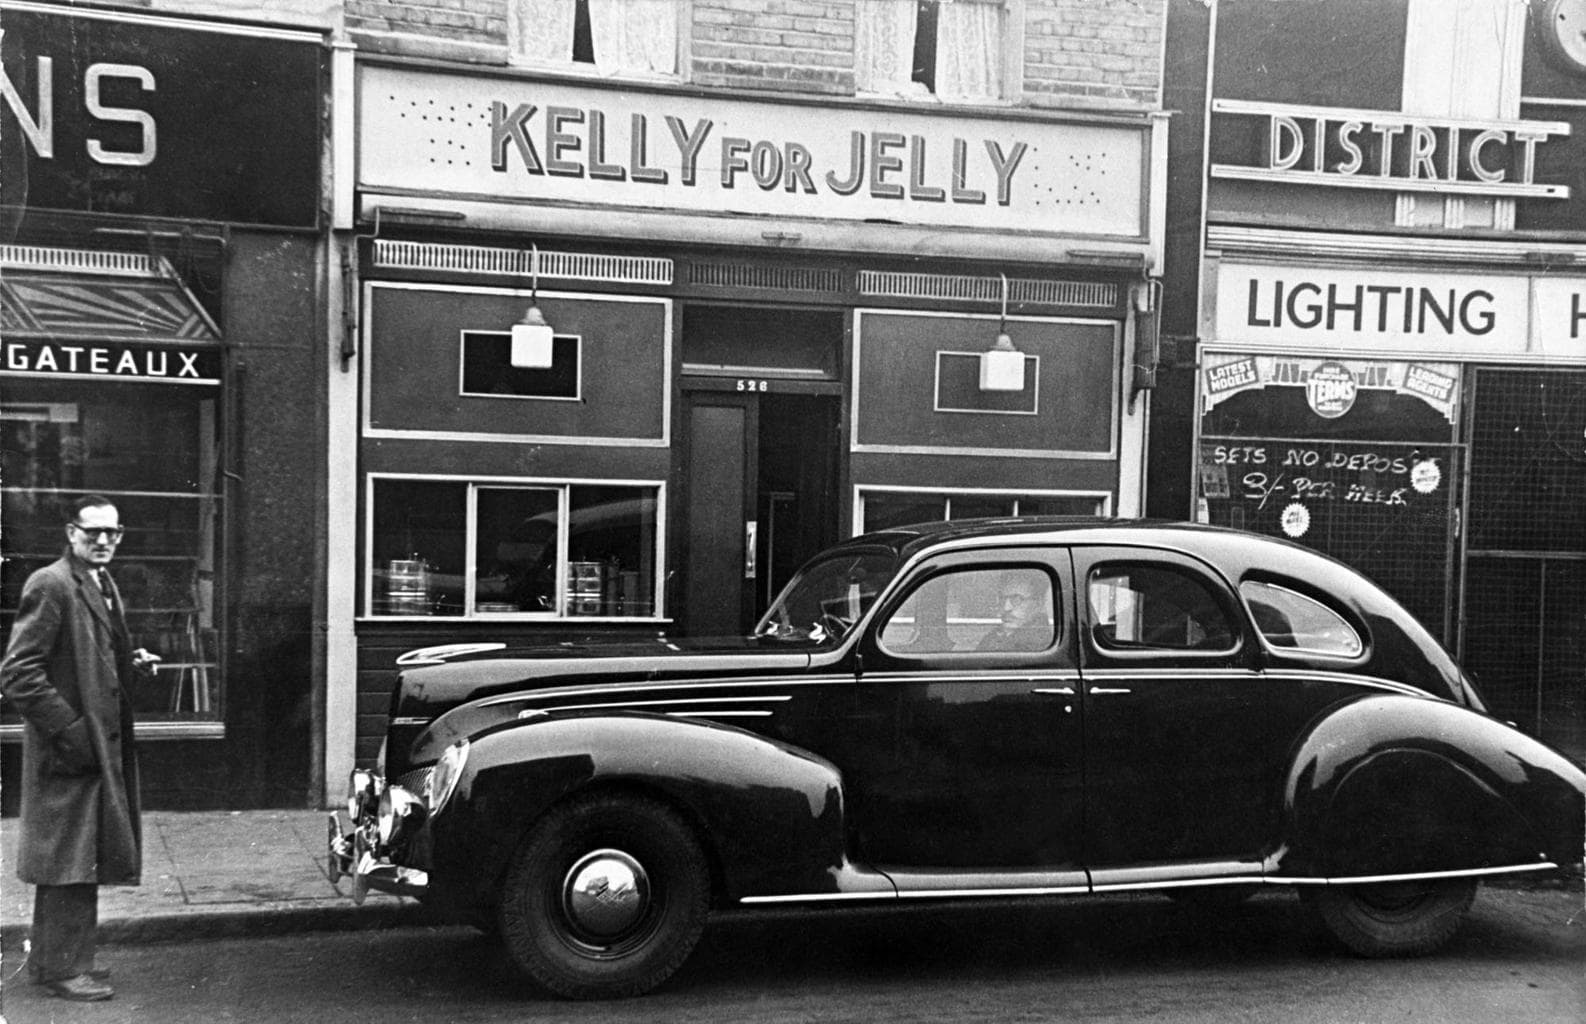 Photo courtesy of G. Kelly, Noted Eel & Pie Shop